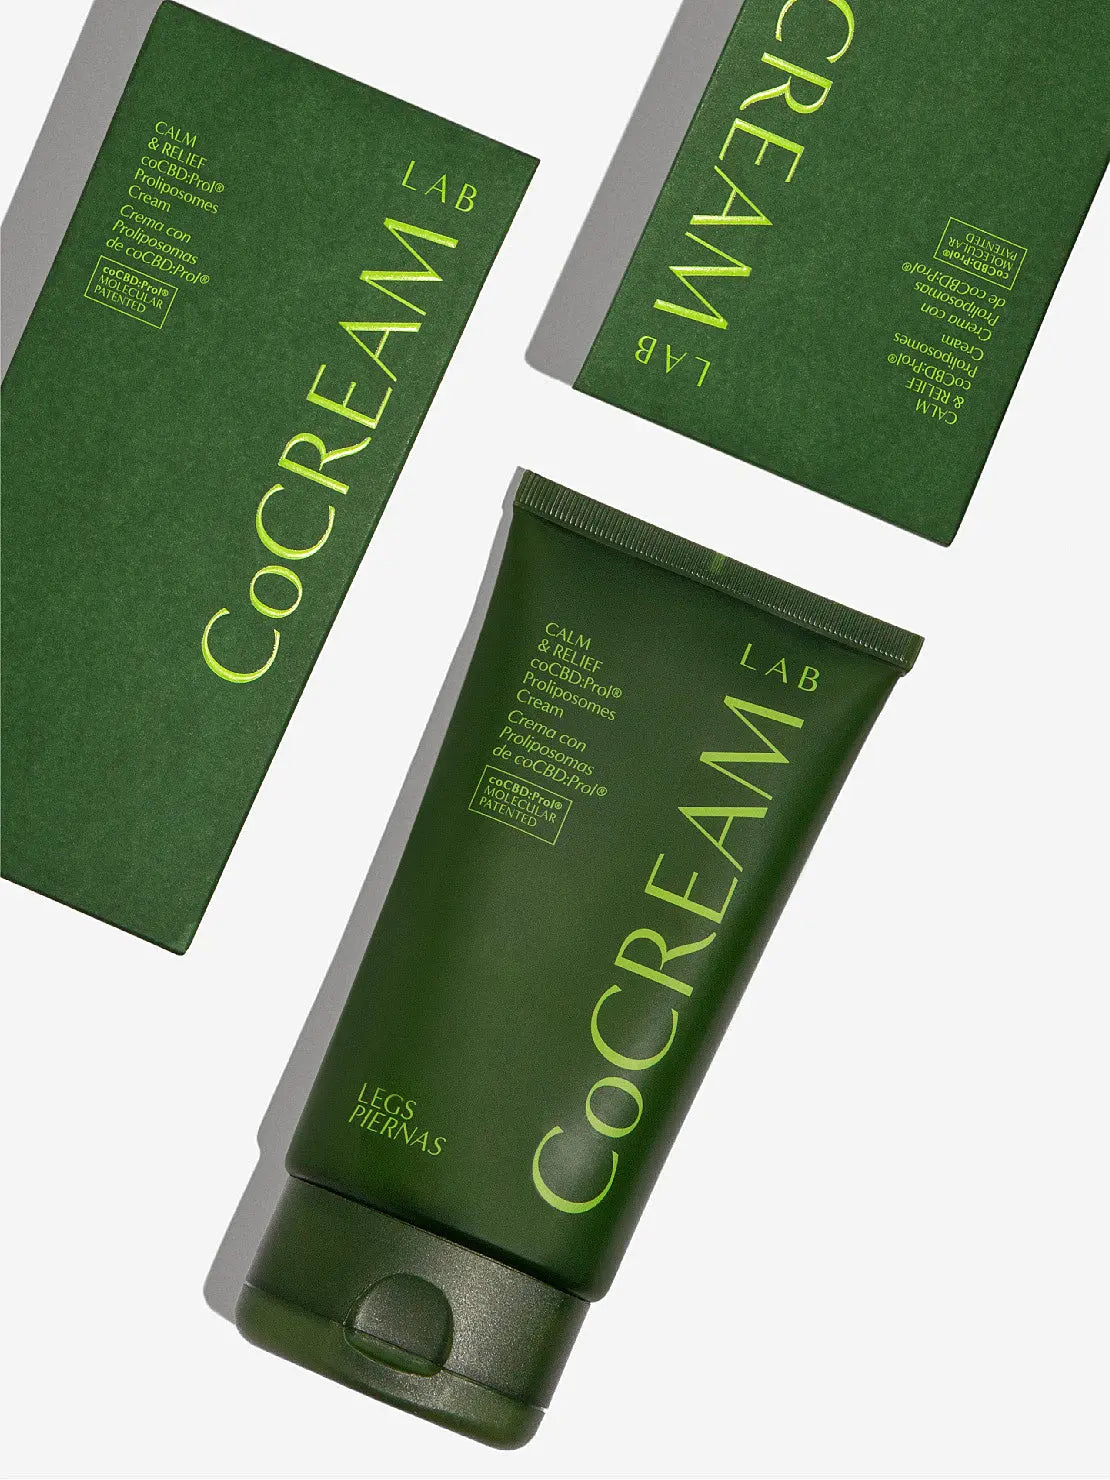 A green tube of Legs Cream 150ml by CoCream Lab with white text printed on the back. The text includes information about the product in multiple languages, ingredients, directions for use, and manufacturer details. Available at Bassalstore in Barcelona, the tube stands upright on a white background.